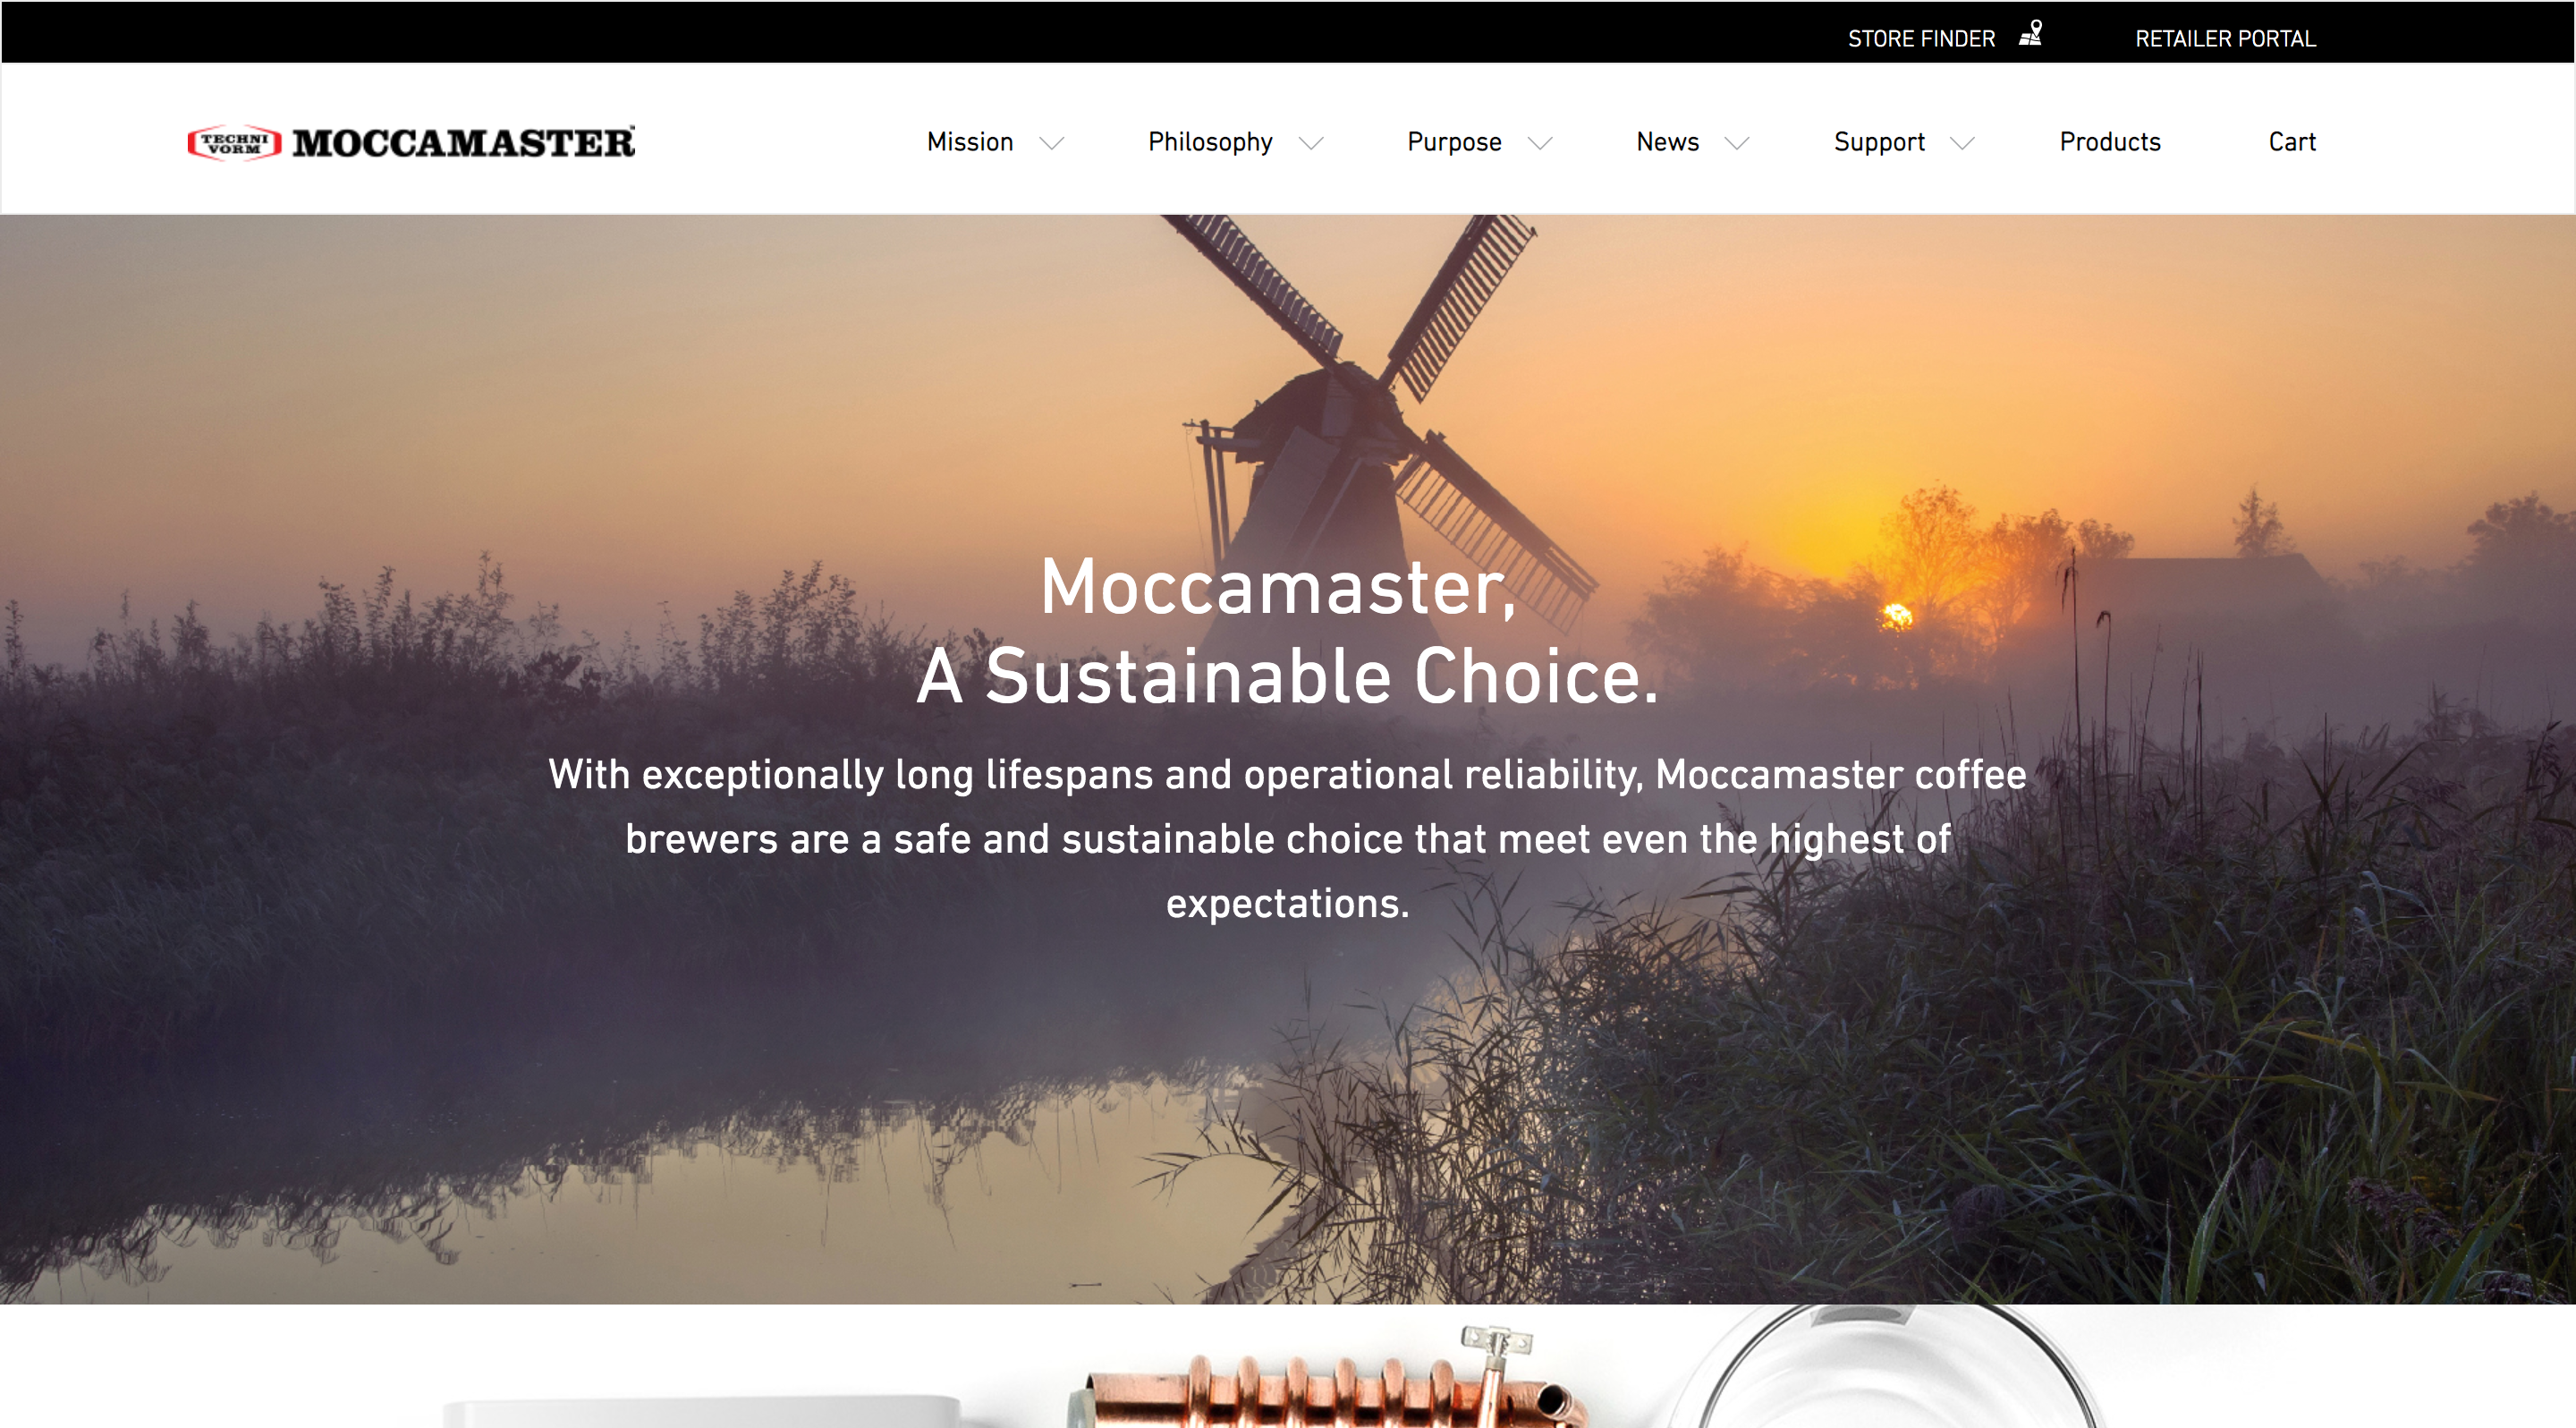 Moccamaster- A sustainable choice screen shot